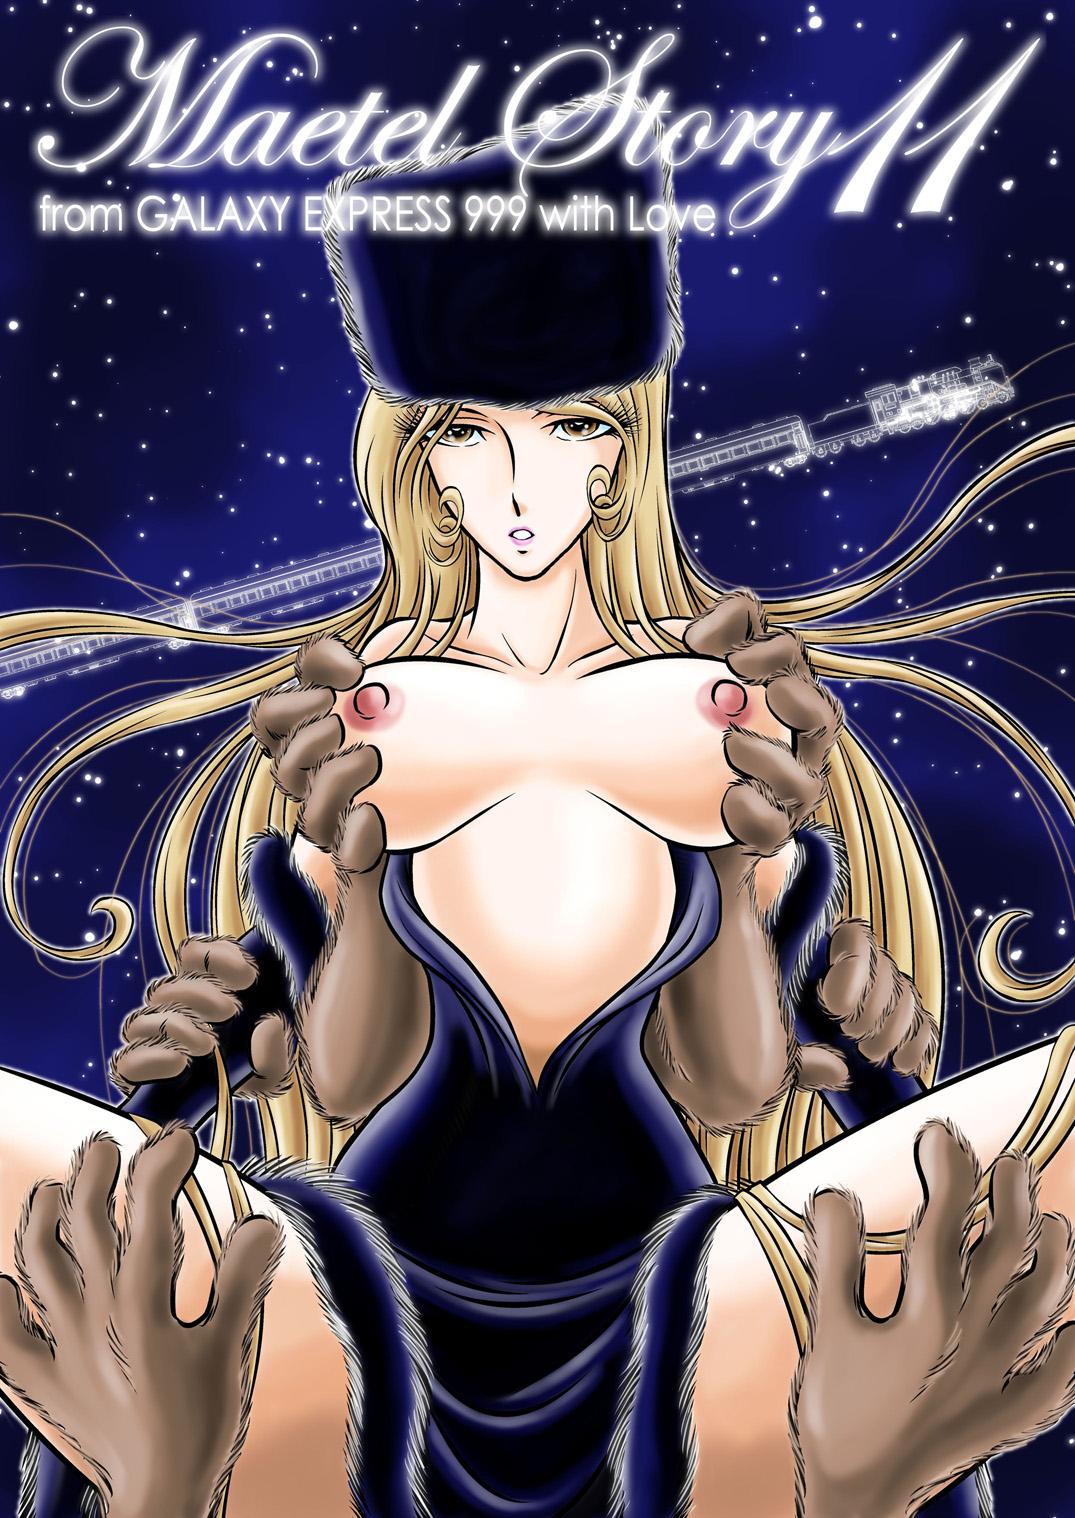 Gay Pissing Maetel Story 11 - Galaxy express 999 Amateur Sex - Picture 1